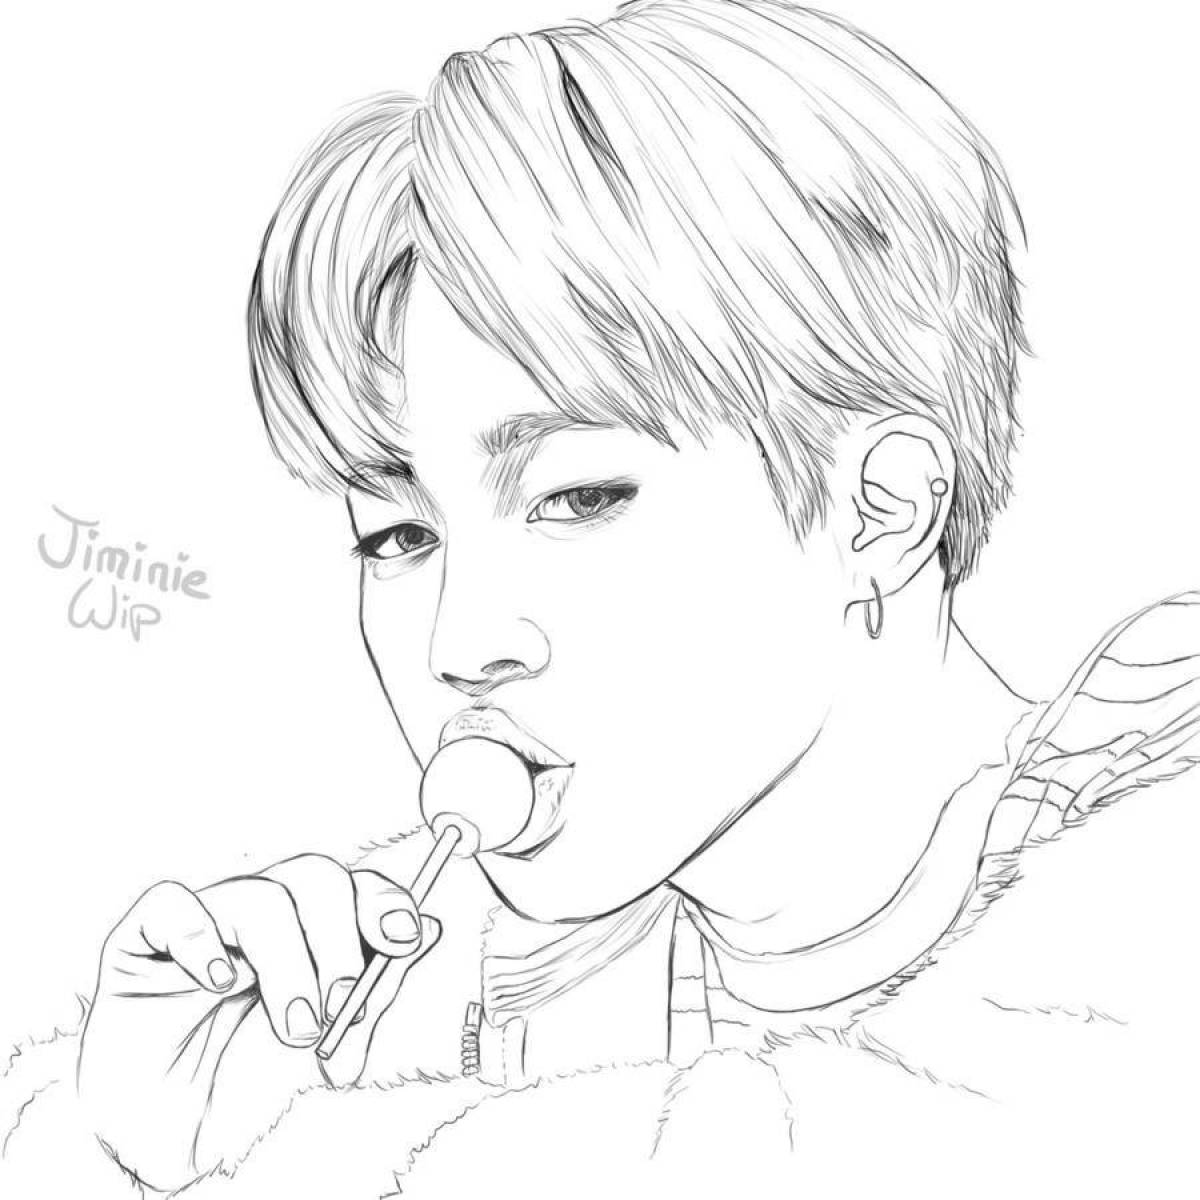 Bts jimin's witty coloring book